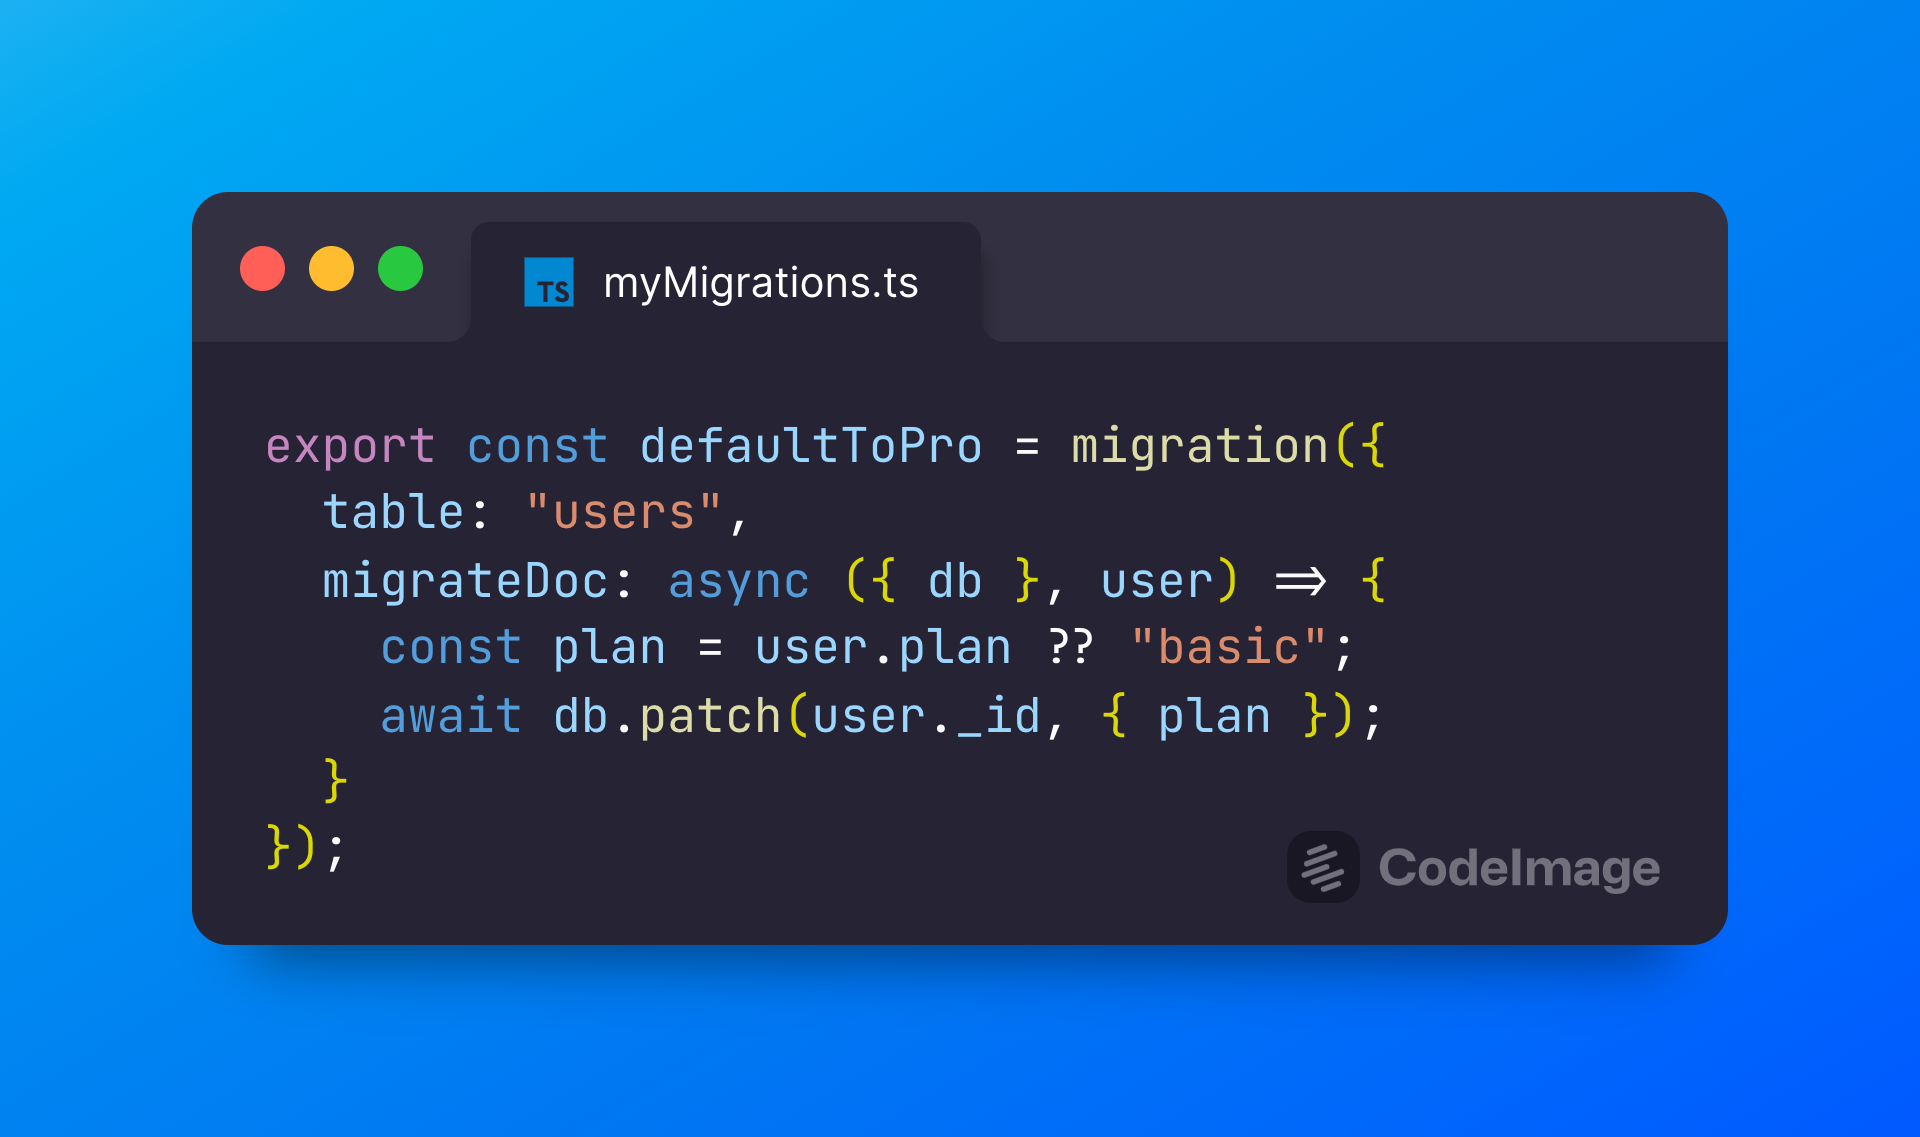 Implementing a migration with our "migration" helper